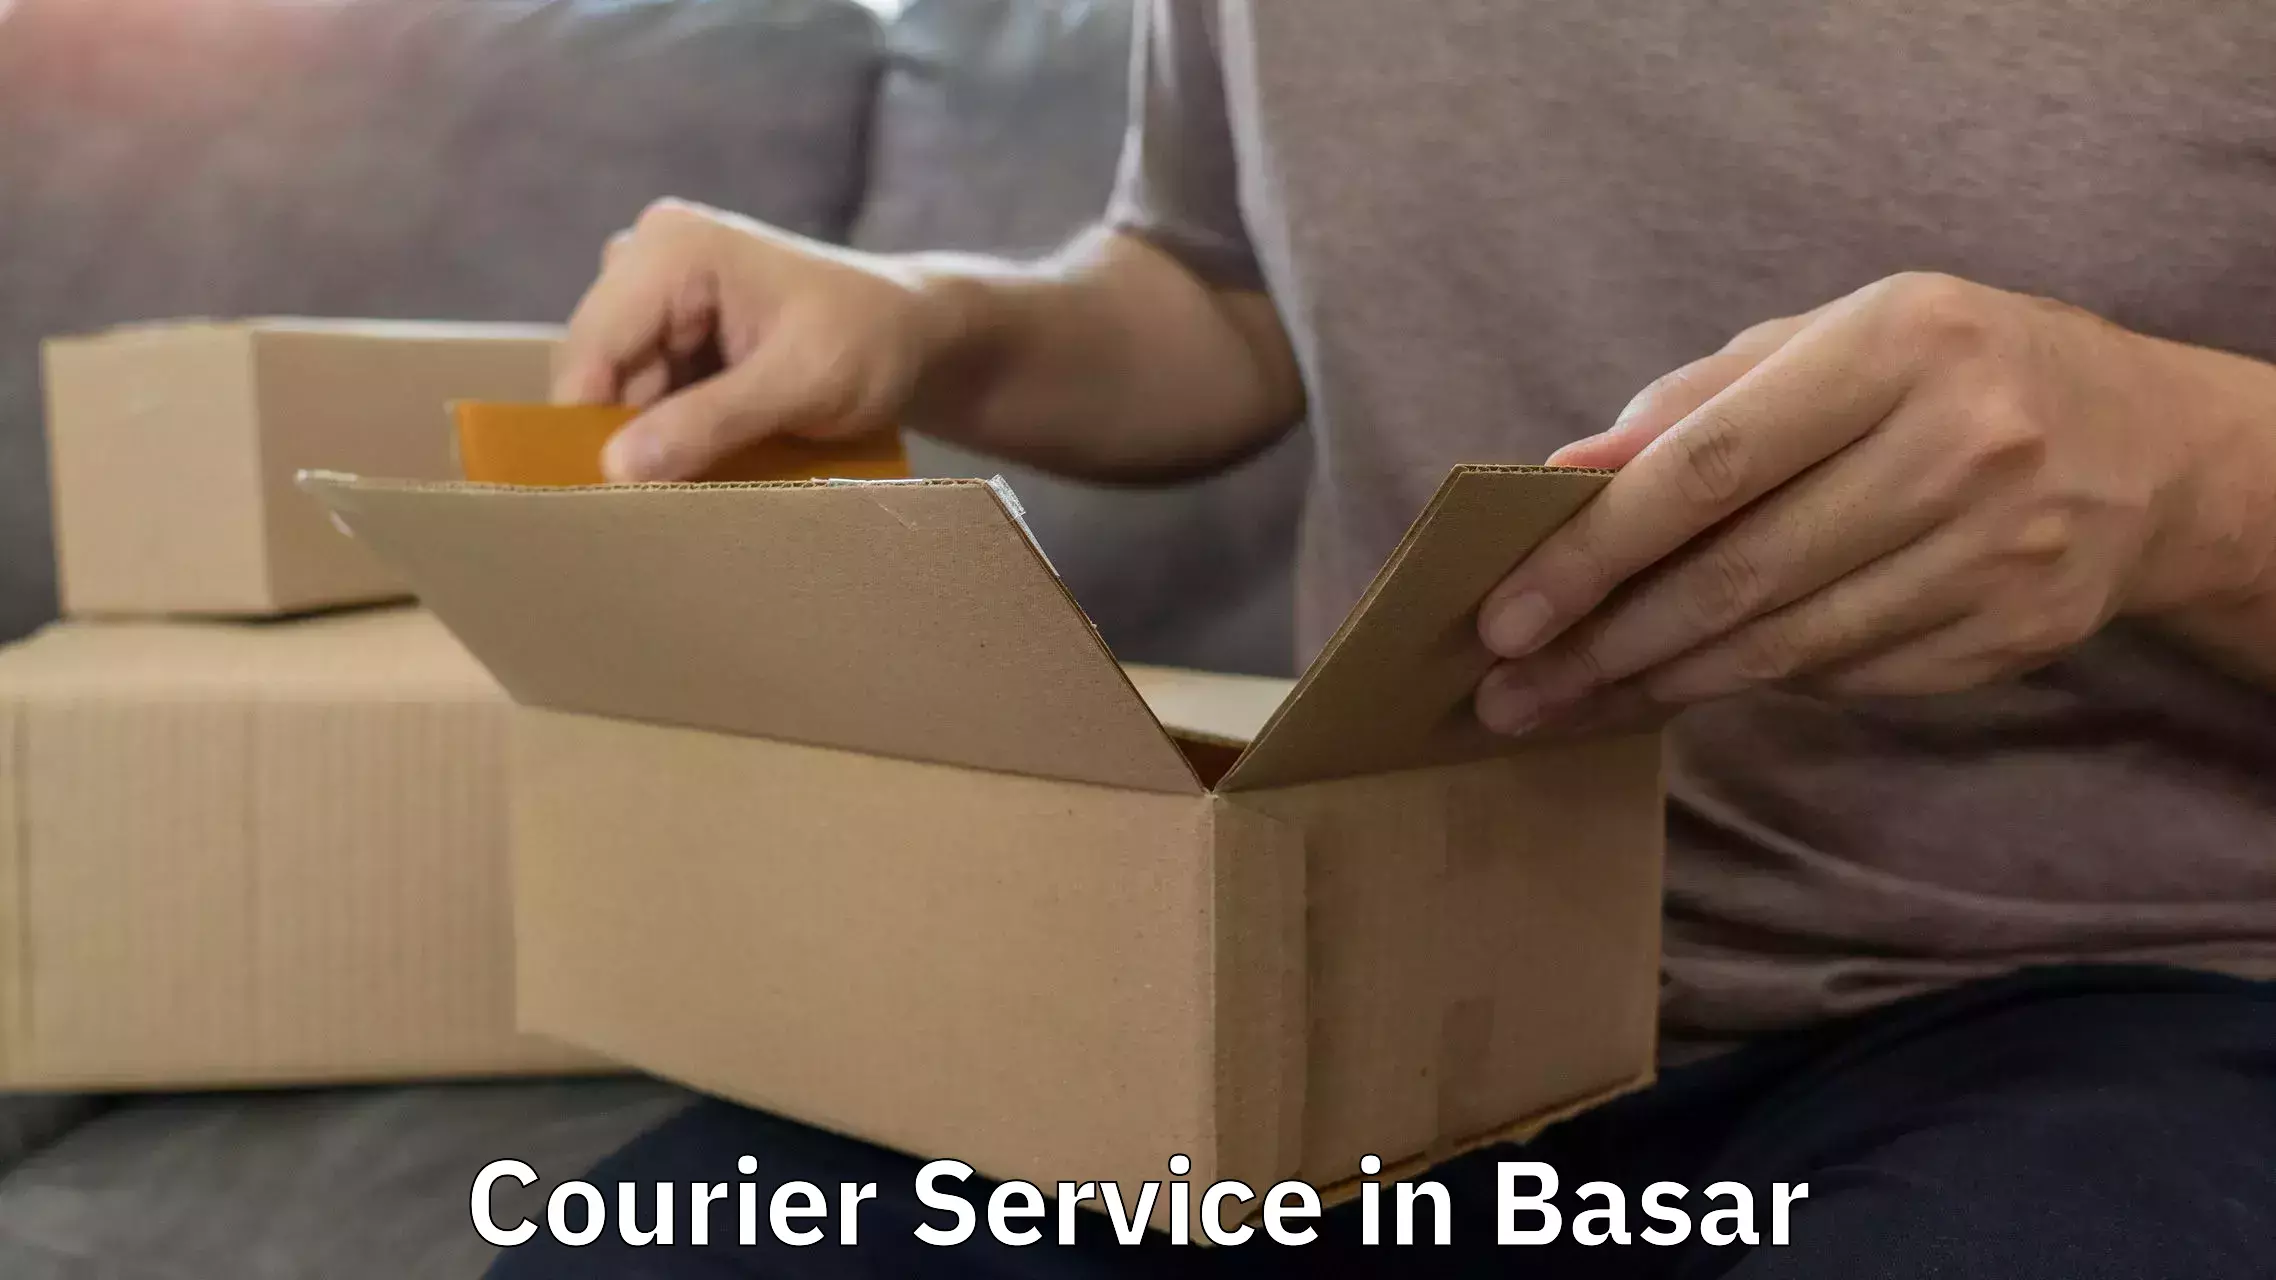 Courier service efficiency in Basar